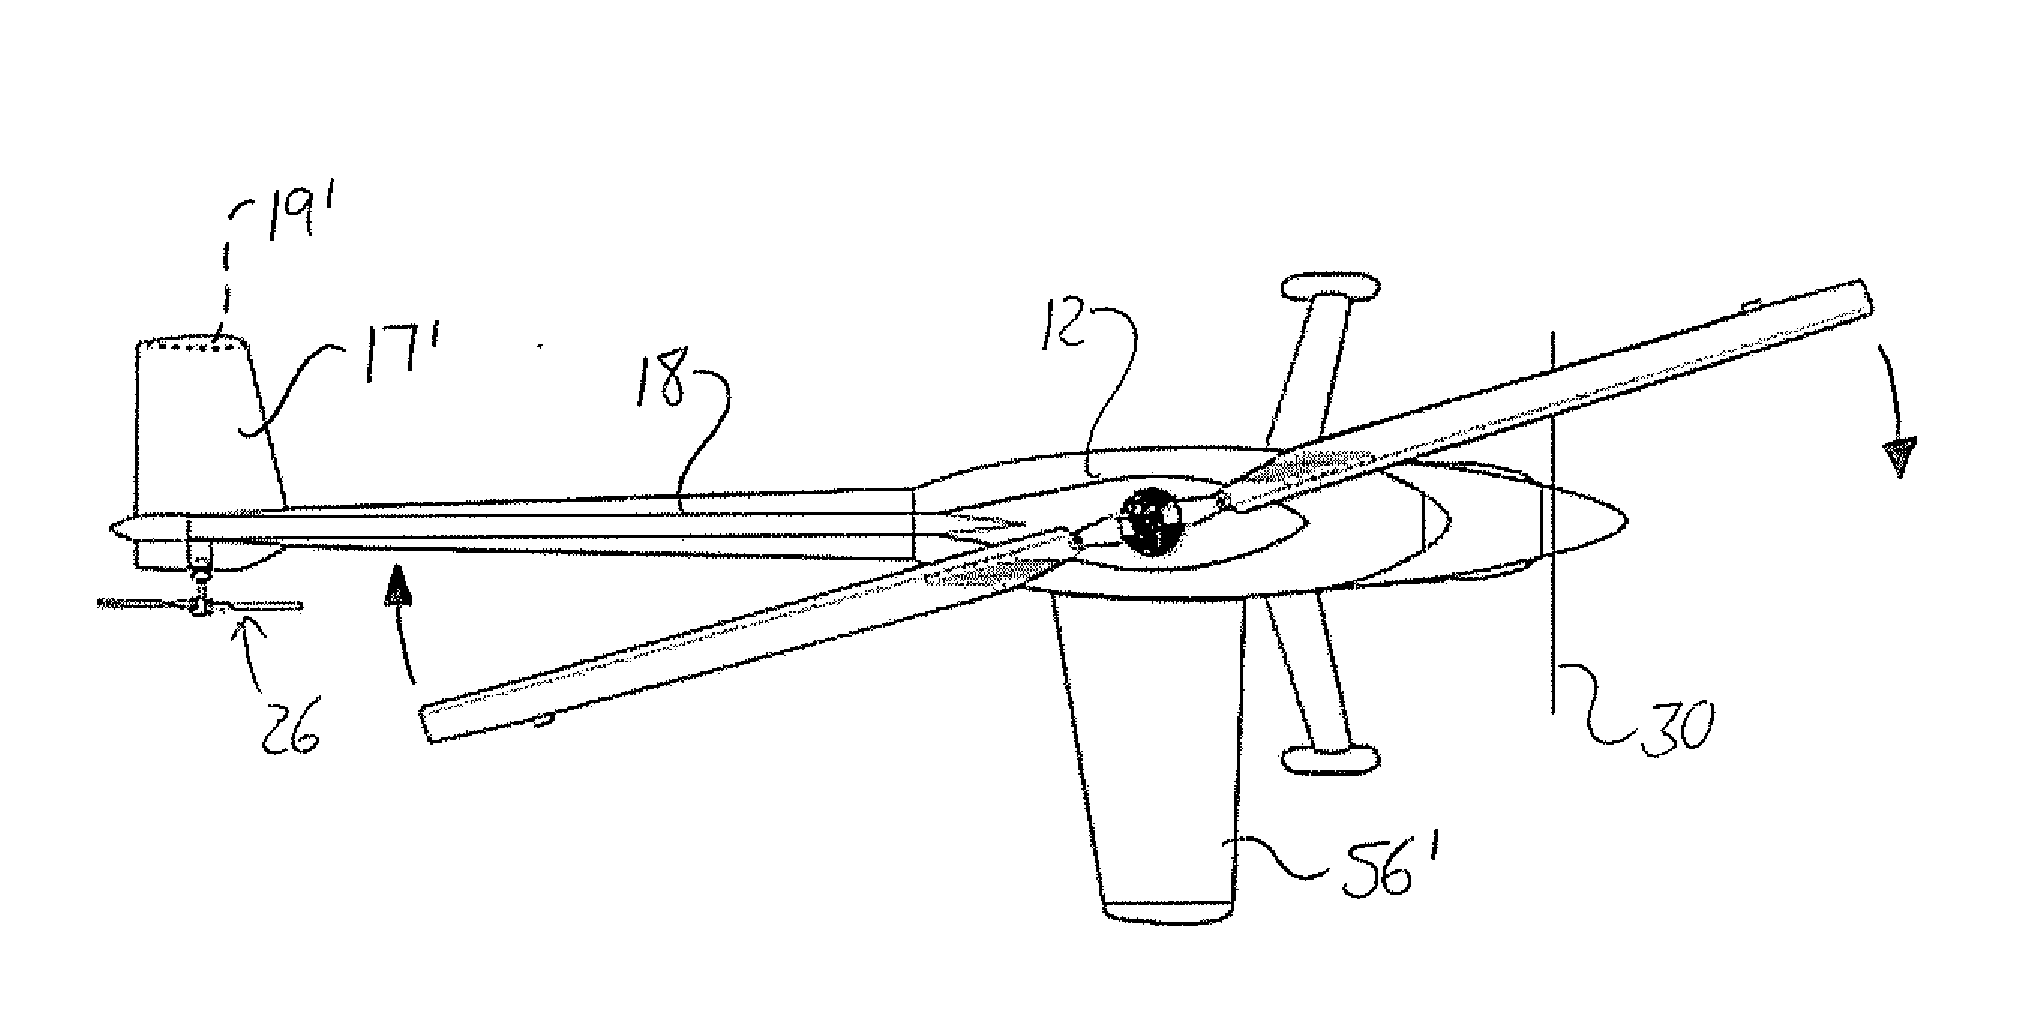 Aircraft with Helicopter Rotor, Thrust Generator and Assymetric Wing Configuration